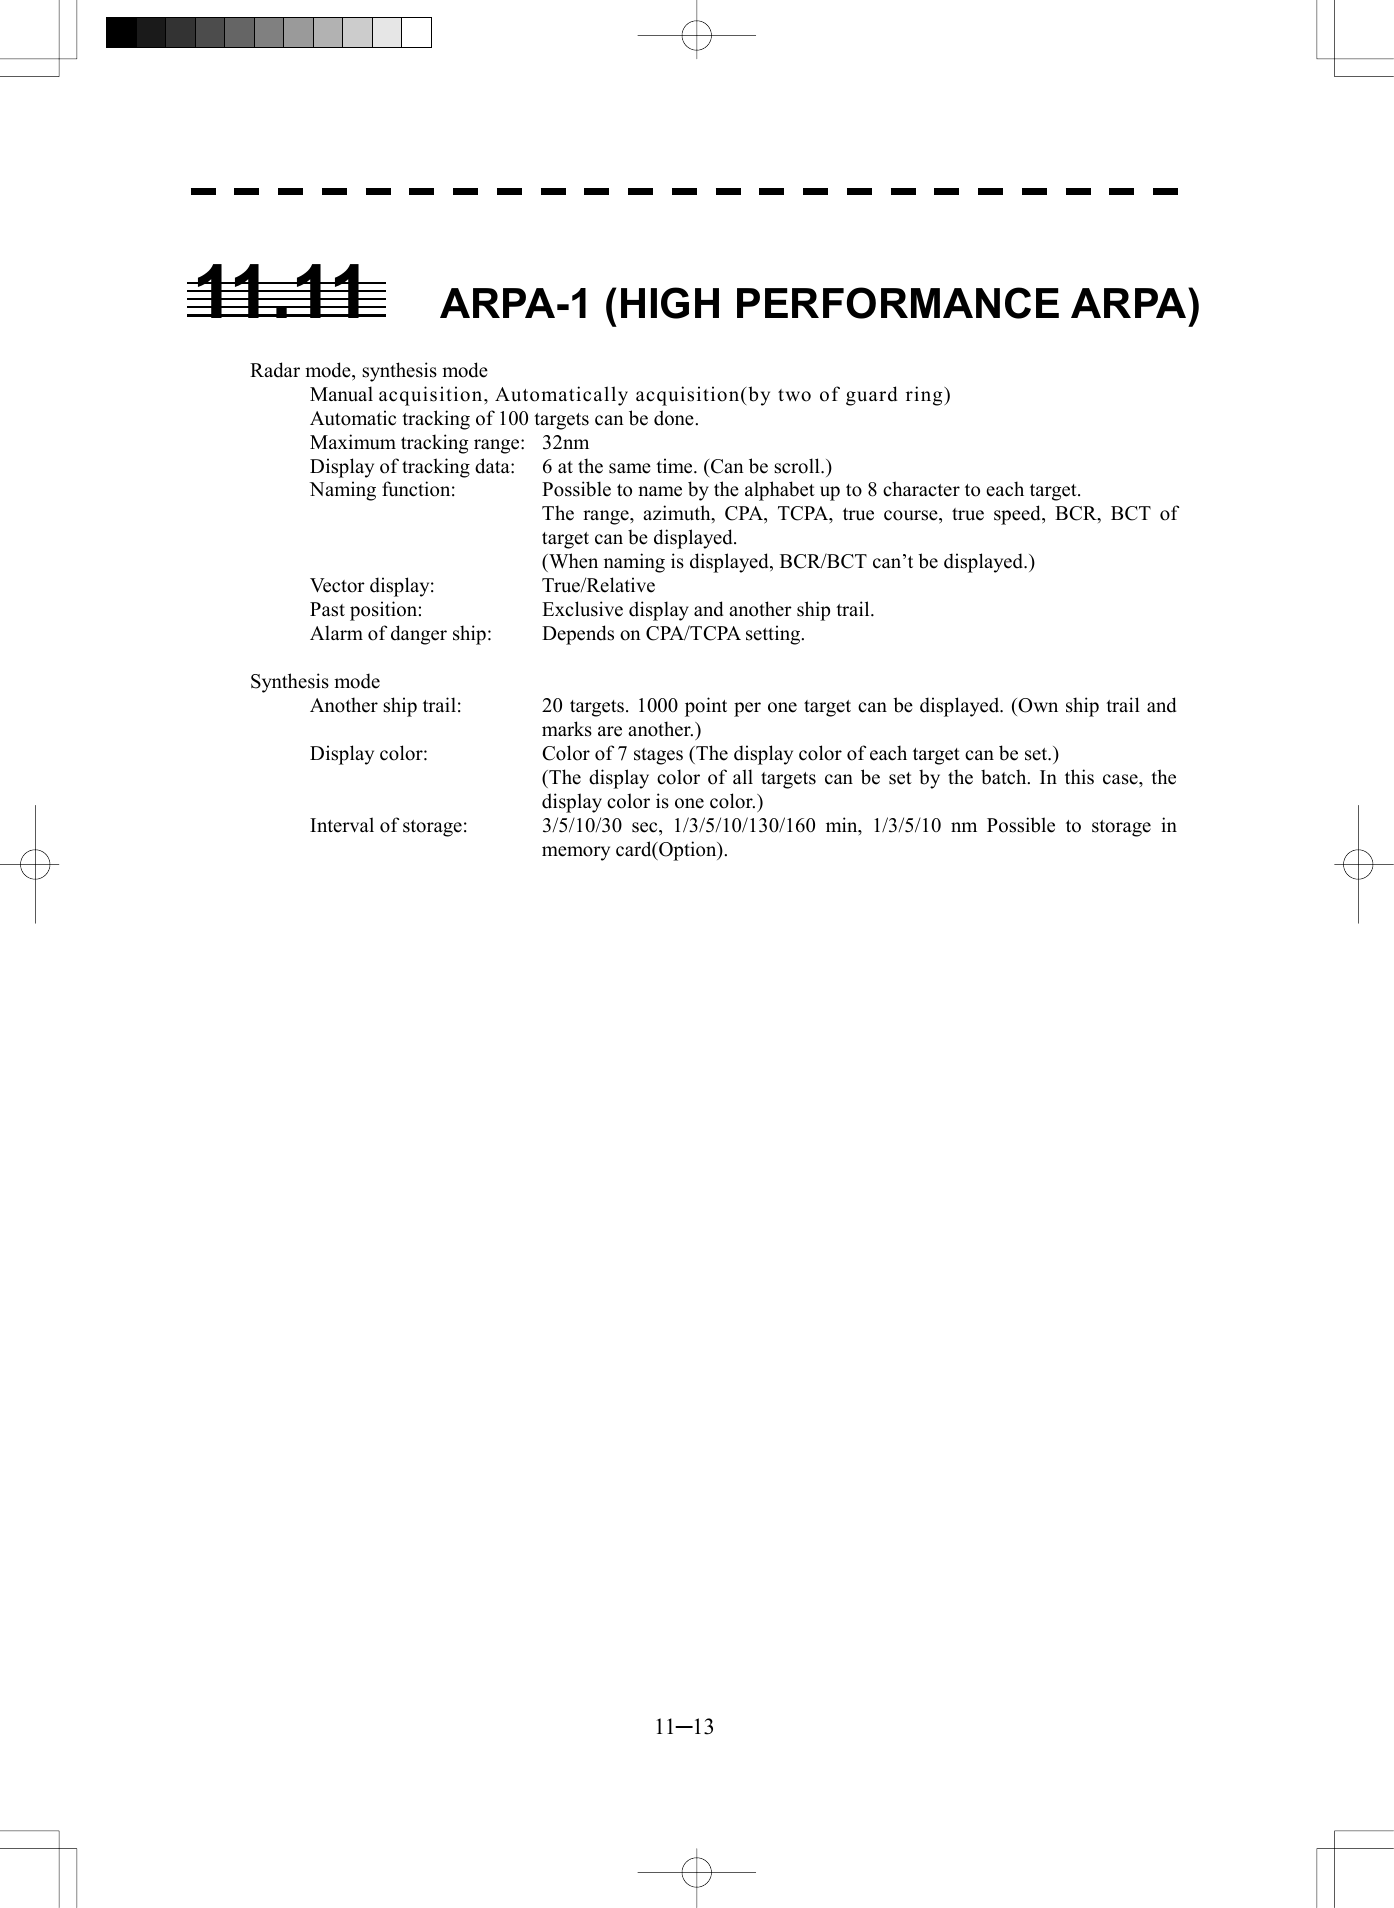  11─13  11.11  ARPA-1 (HIGH PERFORMANCE ARPA)   Radar mode, synthesis mode Manual acquisition, Automatically acquisition(by two of guard ring) Automatic tracking of 100 targets can be done. Maximum tracking range:  32nm Display of tracking data:  6 at the same time. (Can be scroll.) Naming function:  Possible to name by the alphabet up to 8 character to each target.   The range, azimuth, CPA, TCPA, true course, true speed, BCR, BCT of target can be displayed.     (When naming is displayed, BCR/BCT can’t be displayed.) Vector display:    True/Relative Past position:    Exclusive display and another ship trail. Alarm of danger ship:  Depends on CPA/TCPA setting.  Synthesis mode Another ship trail:  20 targets. 1000 point per one target can be displayed. (Own ship trail and marks are another.) Display color:  Color of 7 stages (The display color of each target can be set.)   (The display color of all targets can be set by the batch. In this case, the display color is one color.) Interval of storage:  3/5/10/30 sec, 1/3/5/10/130/160 min, 1/3/5/10 nm Possible to storage in memory card(Option).     